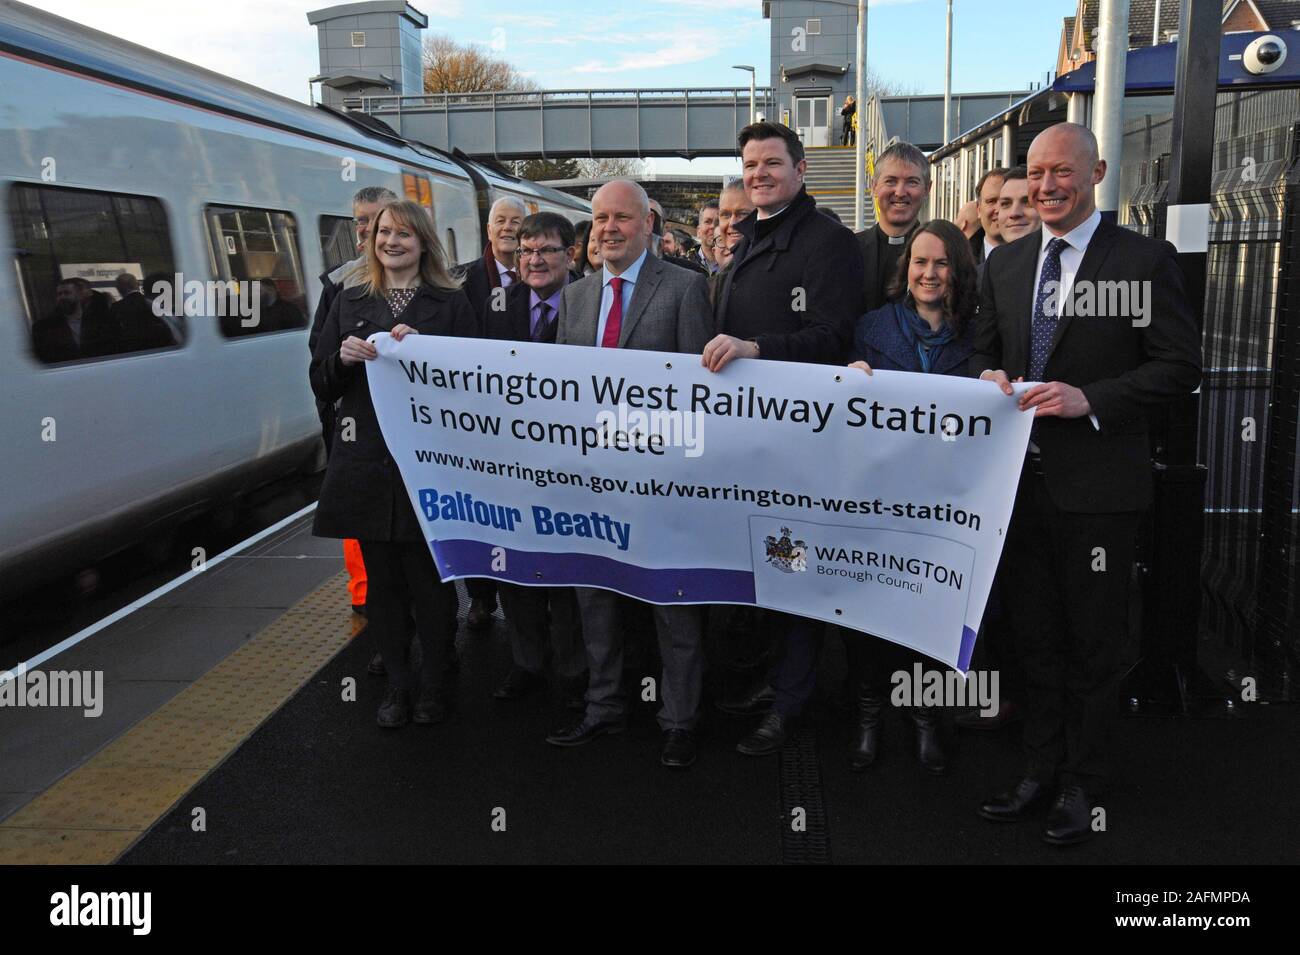 Warrington, Cheshire, UK. 16th Dec, 2019. Council leaders, railway staff and local dignitaries attend the official opening of Warrington West railway station. The £20.5 million station project has been funded by Warrington Borough Council, the Department for Transport, developer contributions and Cheshire and Warrington Local Enterprise Partnership. The station is managed by Northern Trains and will provide vital links for the Chapelford community to Liverpool and Manchester, with 4 trains per hour, a 250 car capacity park and ride and local bus services. Credit: G.P.Essex/Alamy Live News Stock Photo